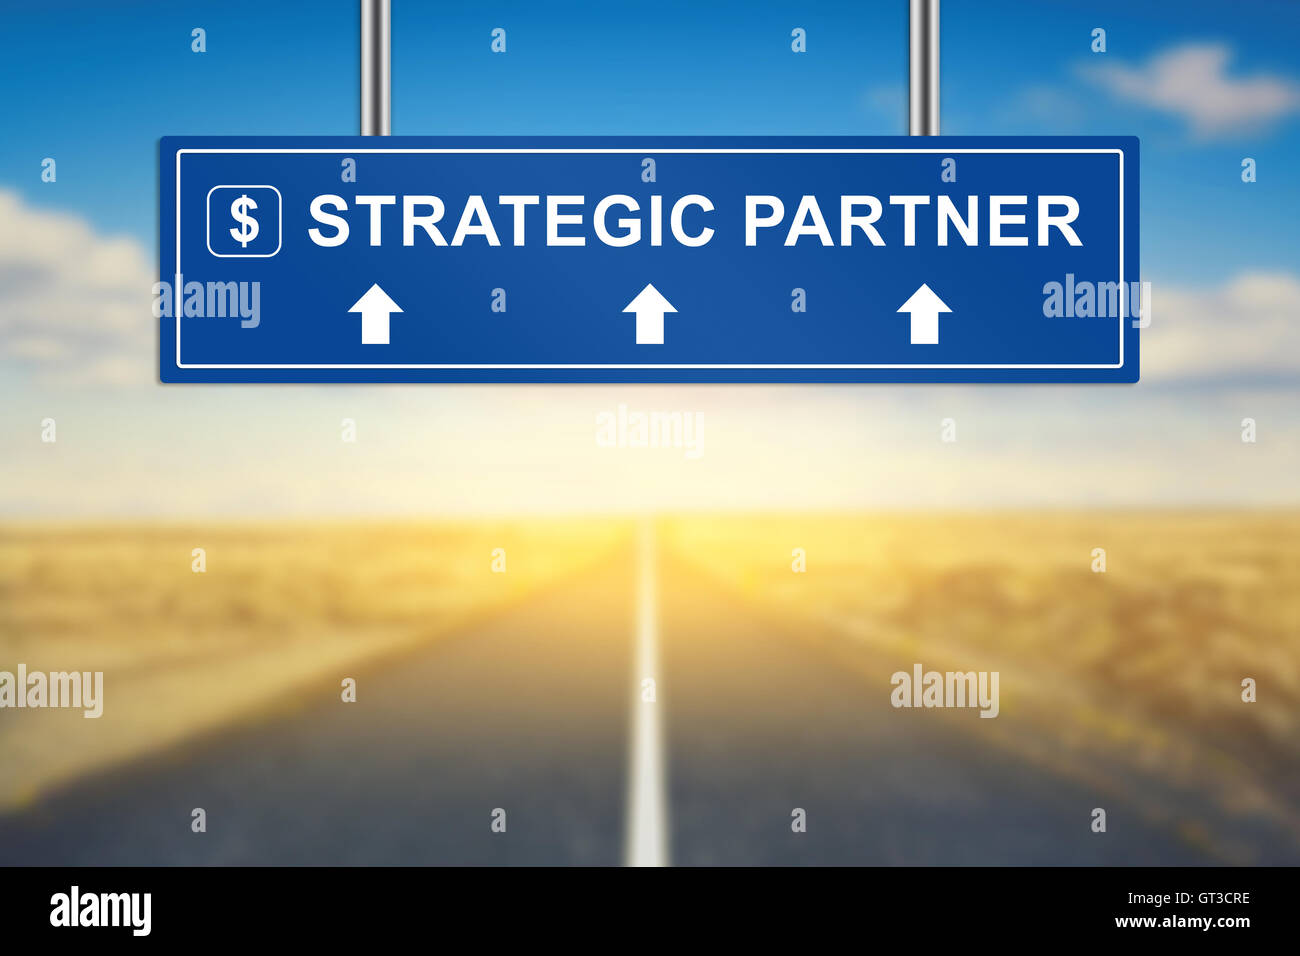 strategic partner words on blue road sign with blurred background Stock Photo